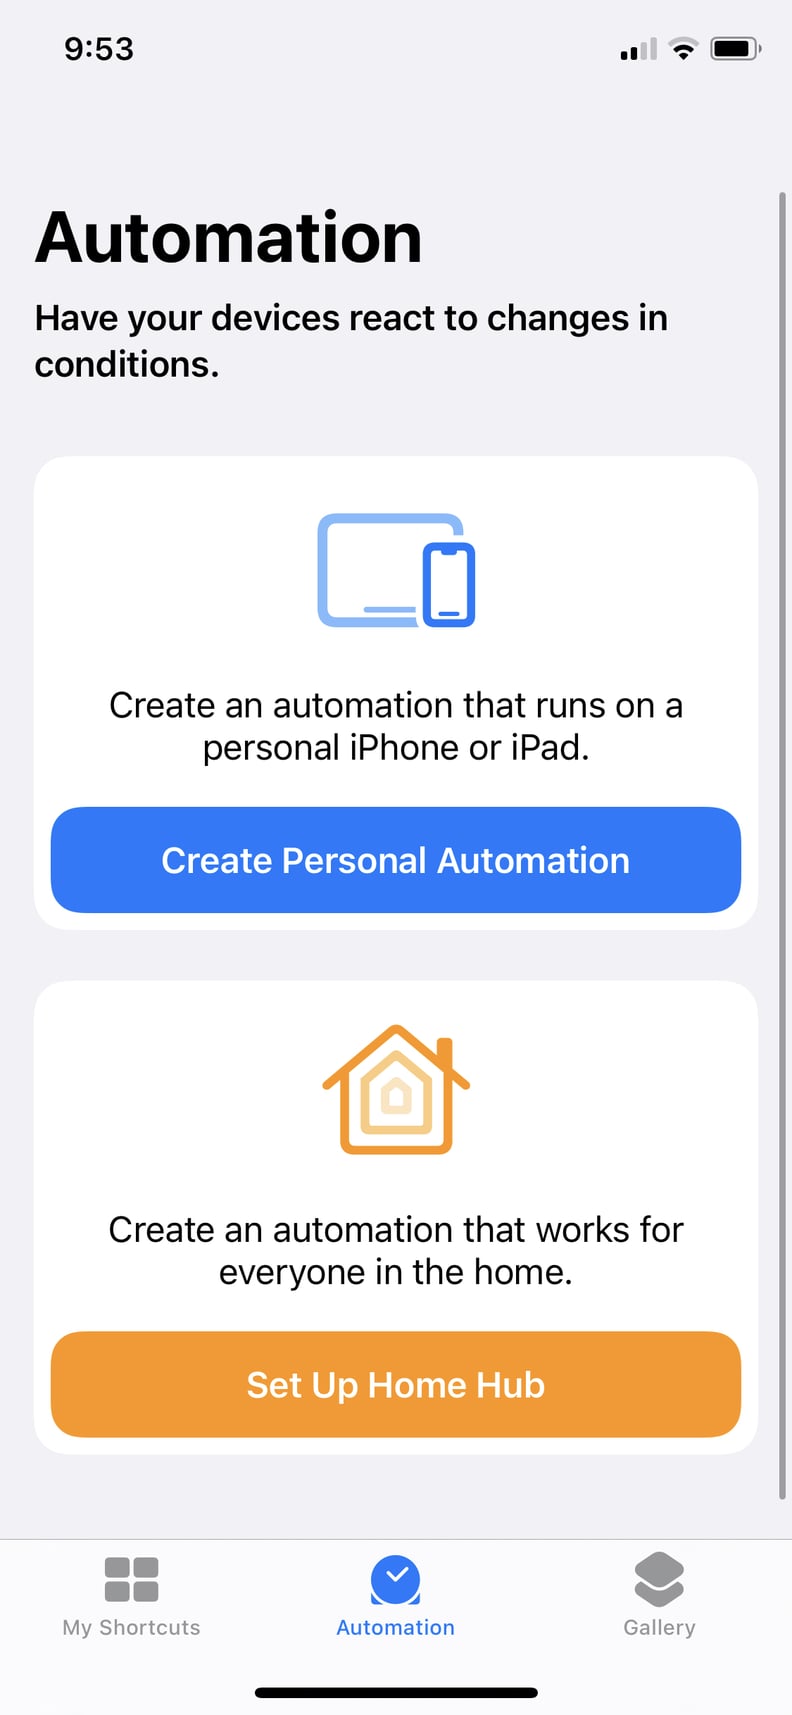 Open the Shortcuts App and Select "Create Personal Automation"